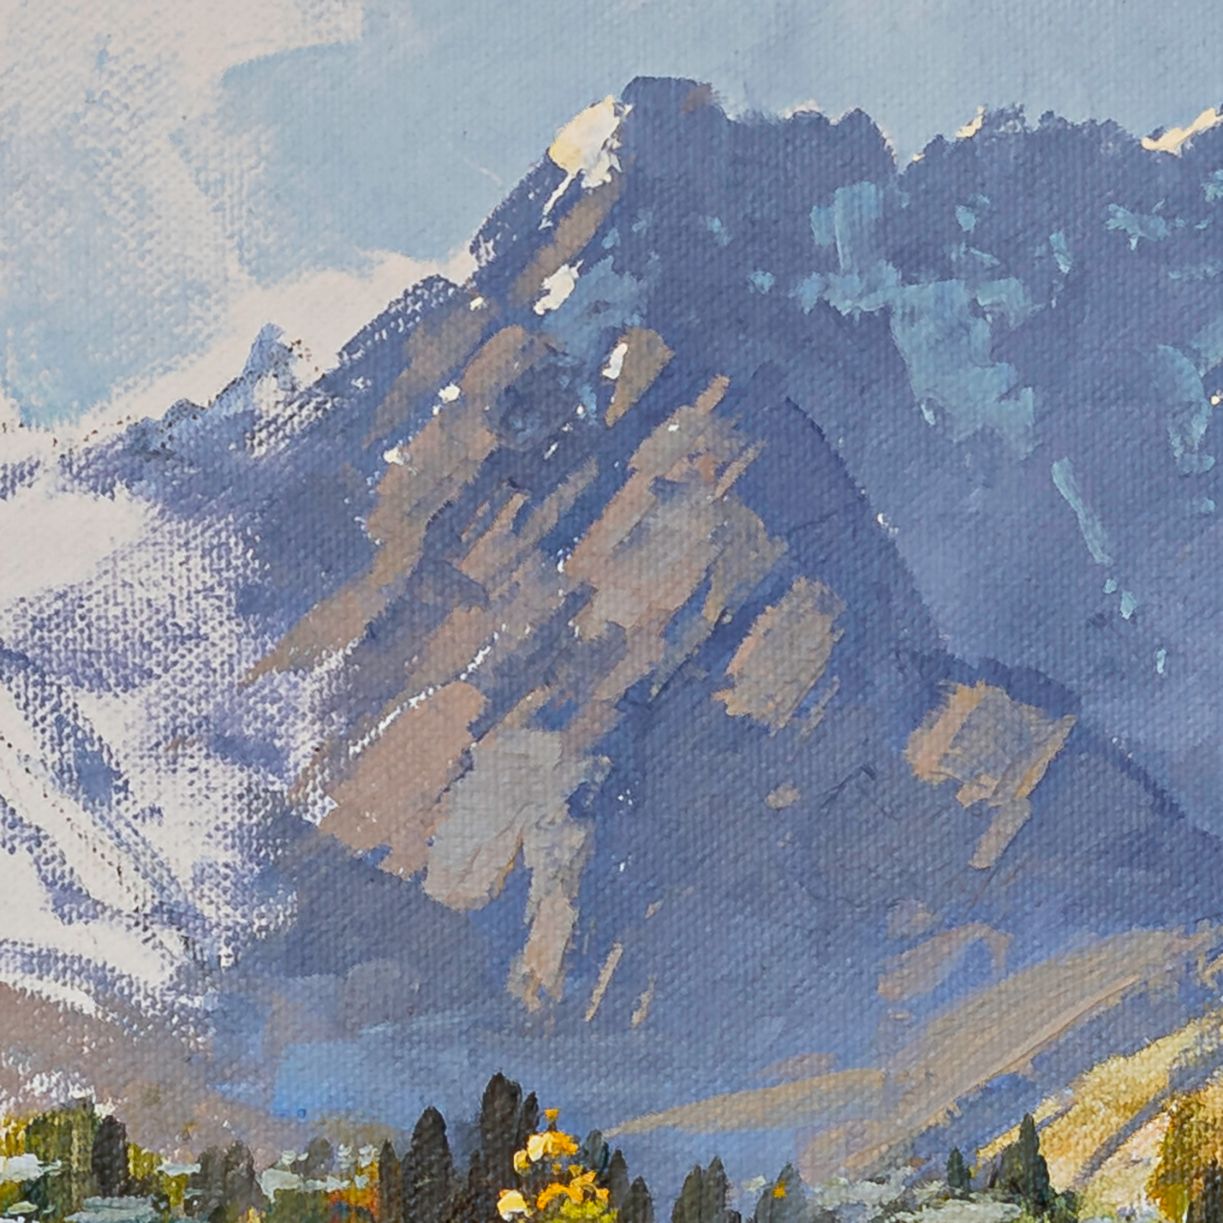 Partial detail of Oil Painting by Neil J Bartlett Remarkables Mountain Range Queenstown New Zealand Silver Fern Gallery